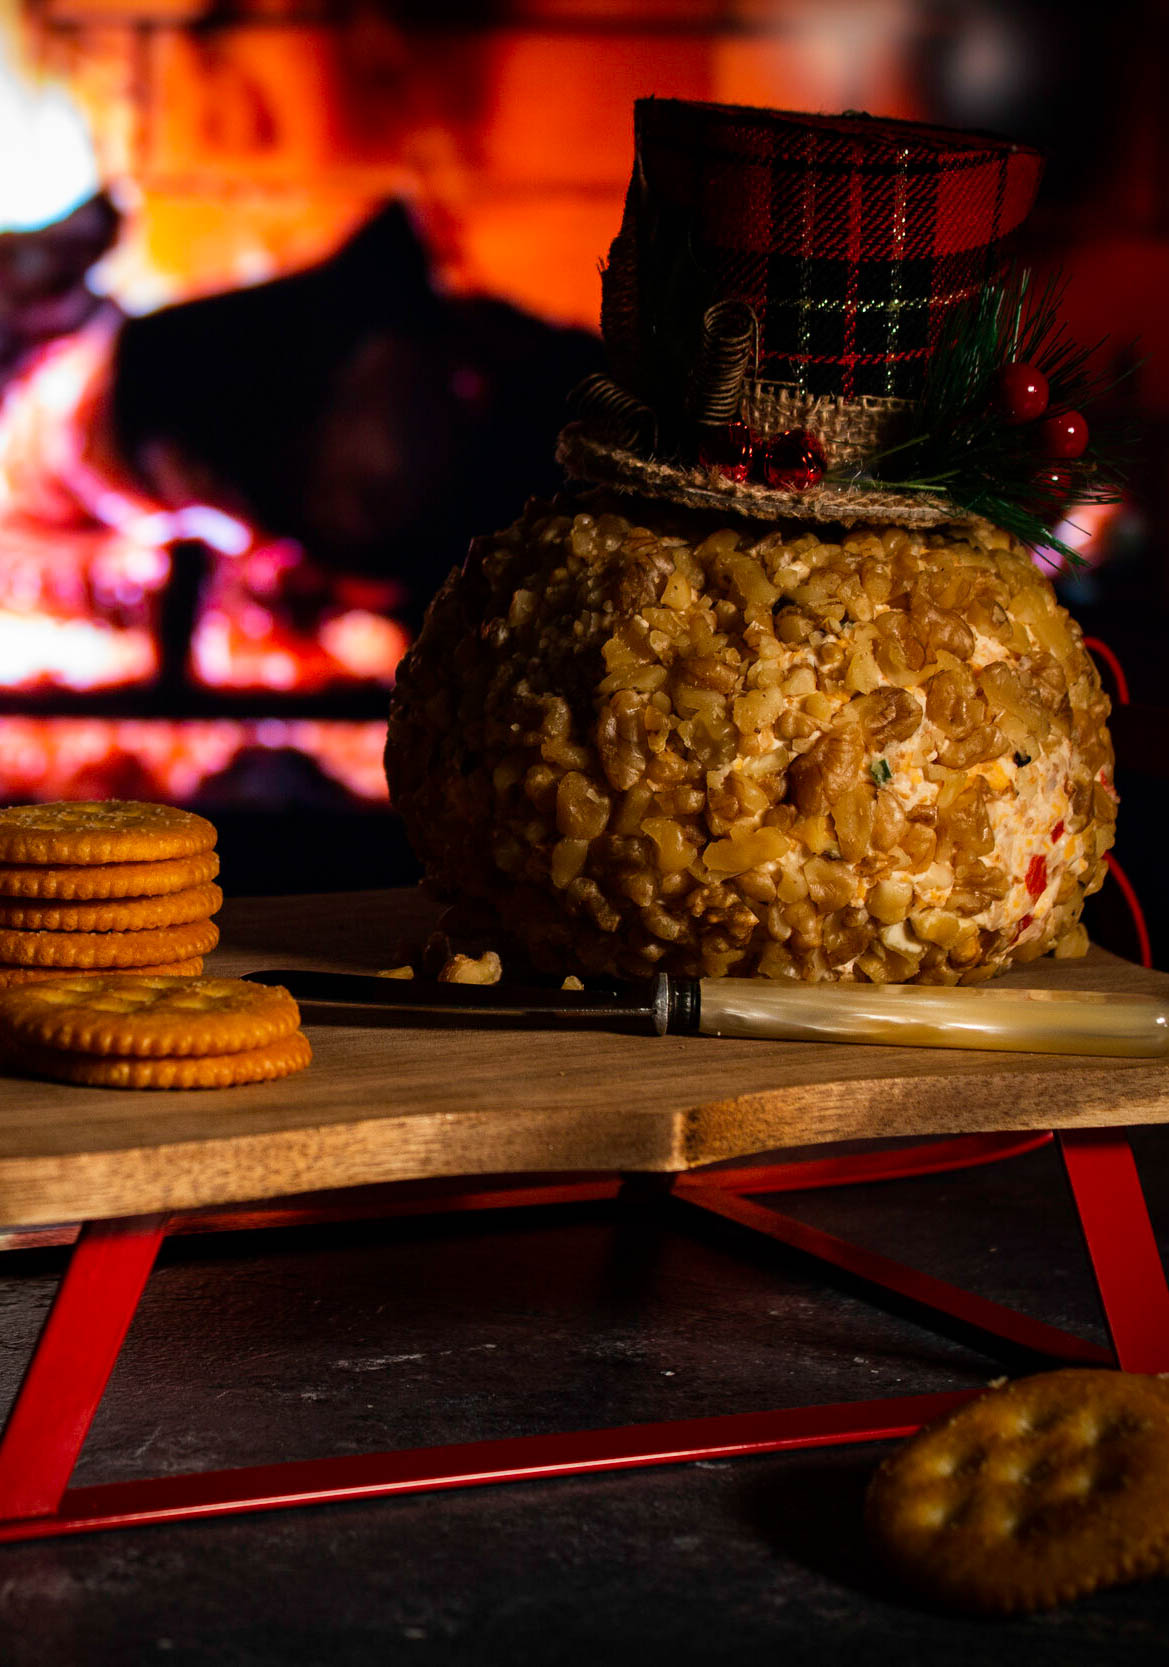 Cheeseball wearing a top hat on a sleigh cutting board with butter crackers and a knife.